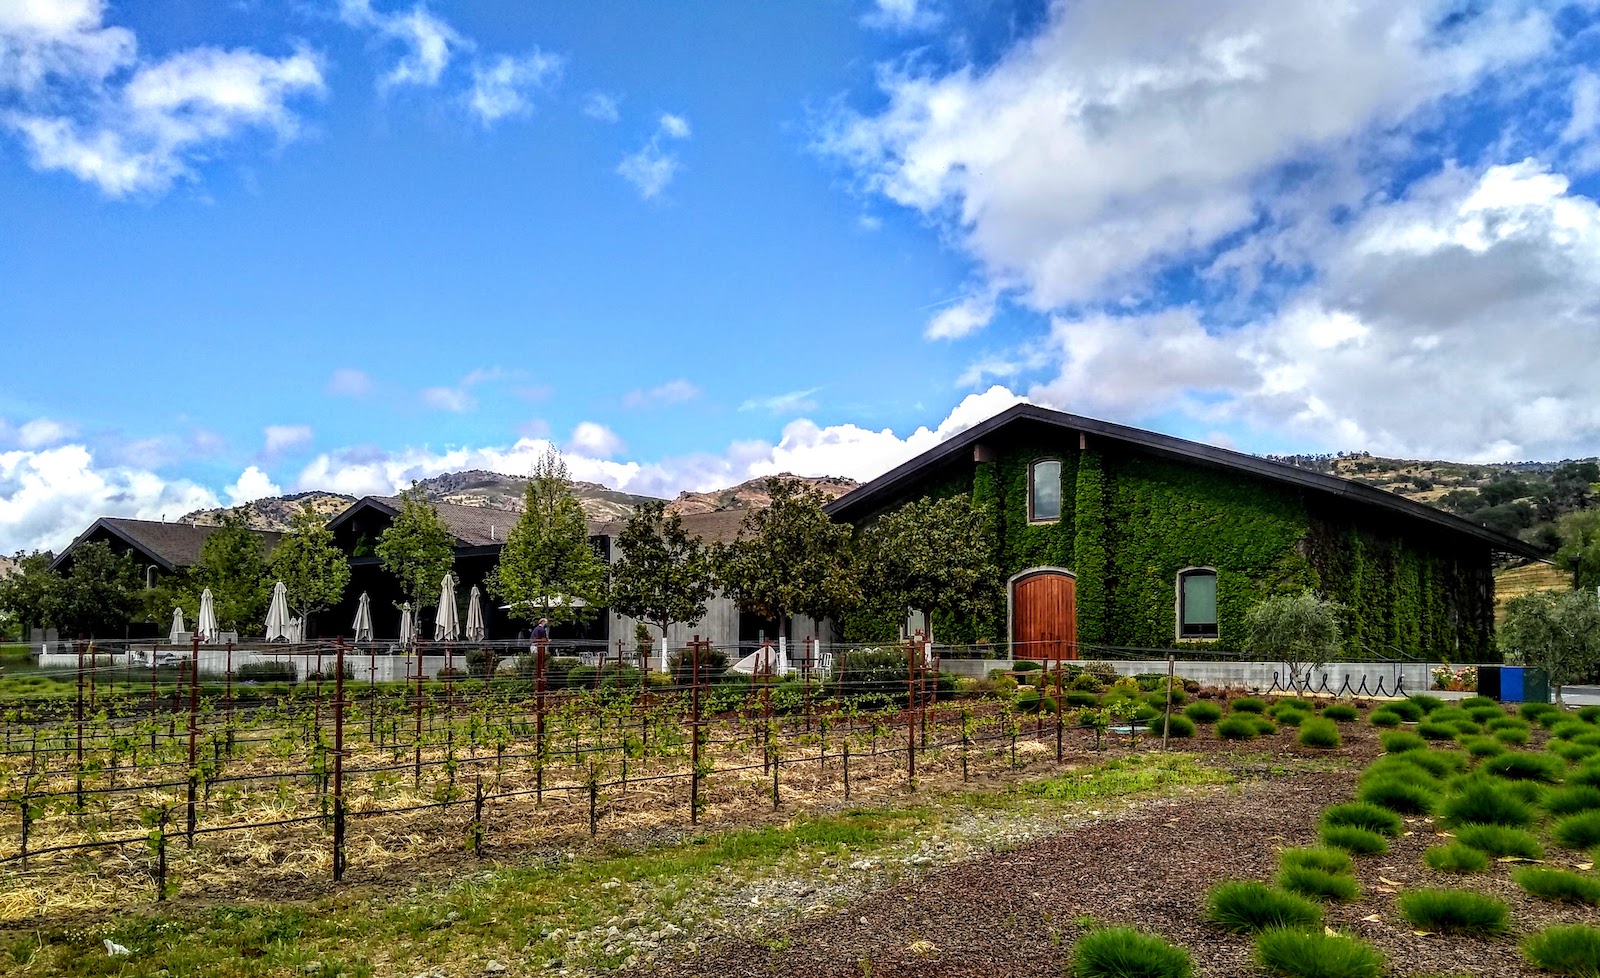 Image shows growing area and buildings at Clos du Val, part of GEMS of Napa Valley